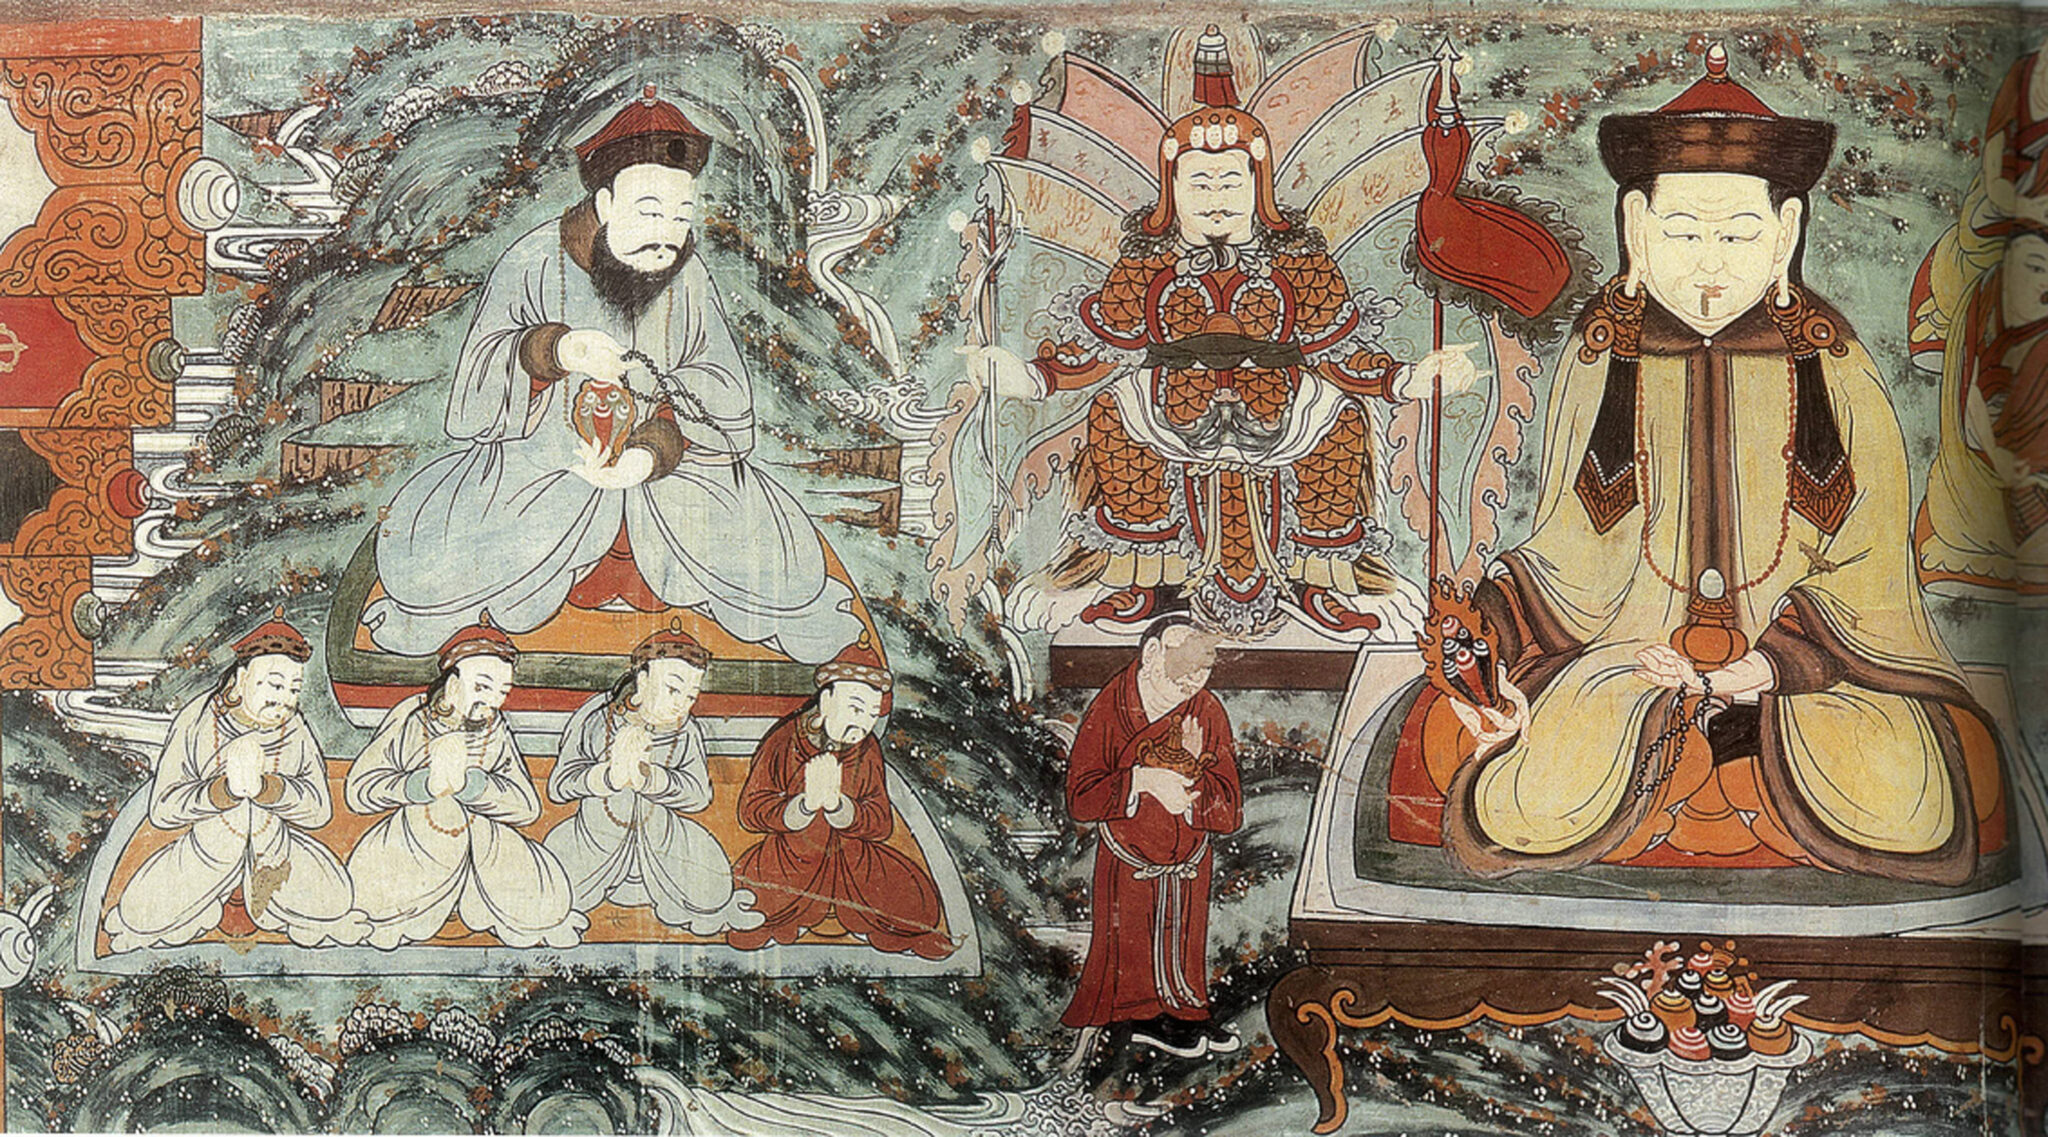 Mural depicting monarch at right with family members and attendants arranged to his left